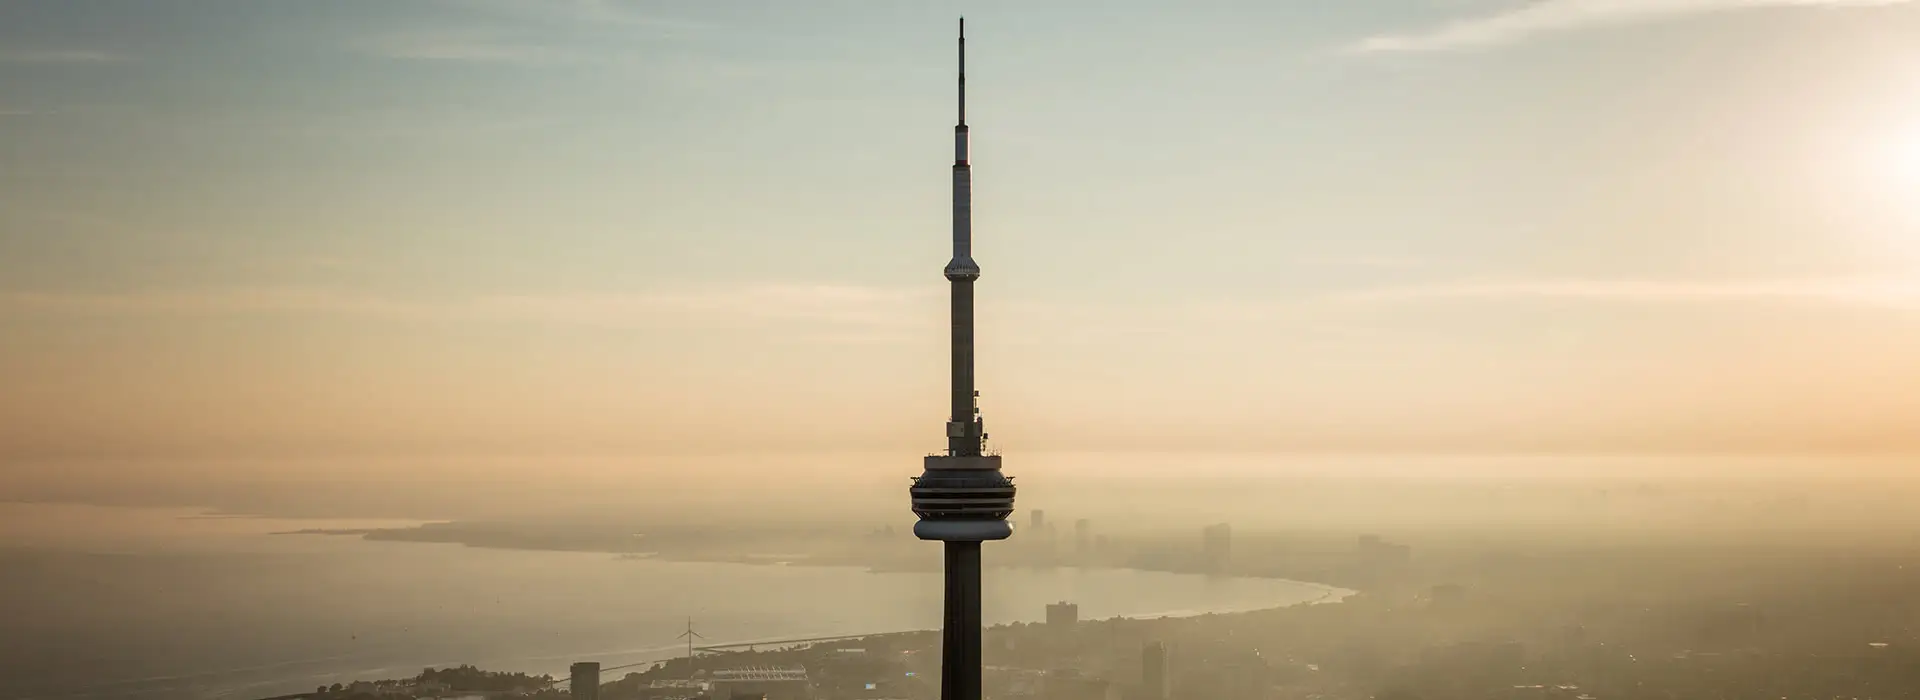 Toronto, Ontario and Canada are Making a Come Back – Stronger Than Ever